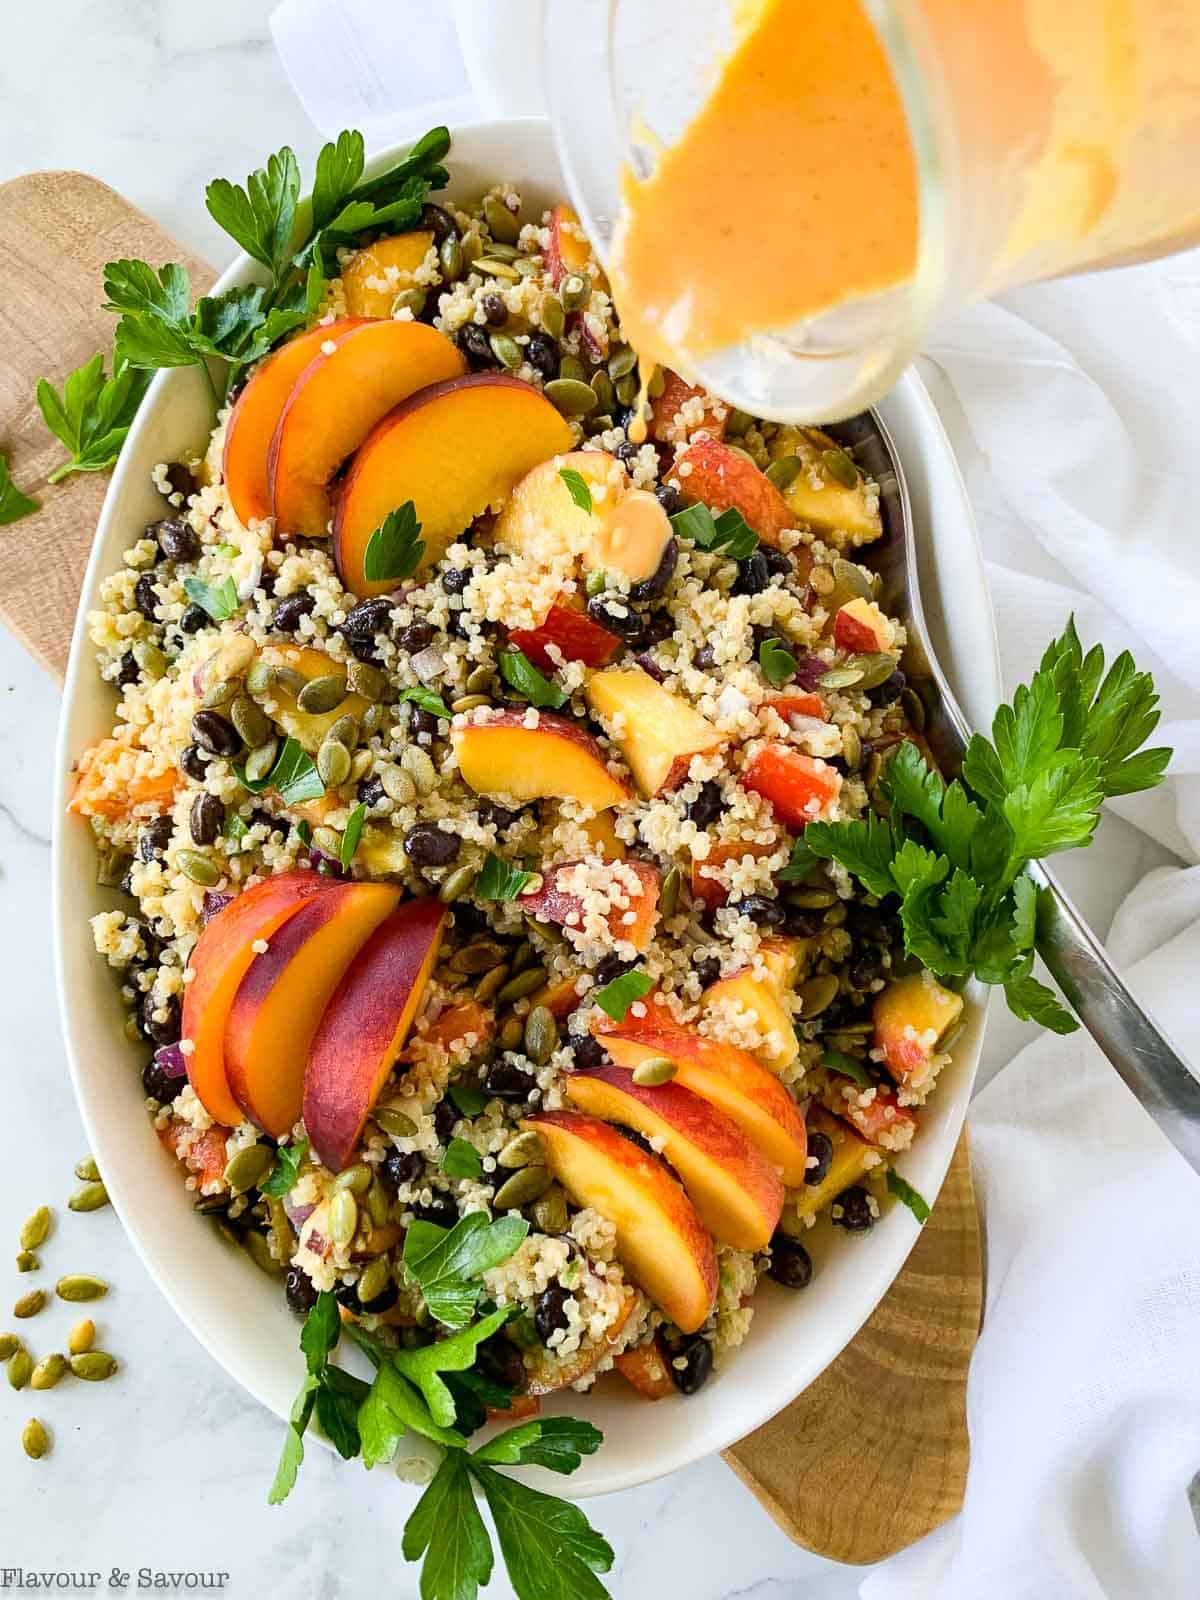 Quinoa Black Bean salad with peaches and pumpkin seeds arranged in an oval bowl.